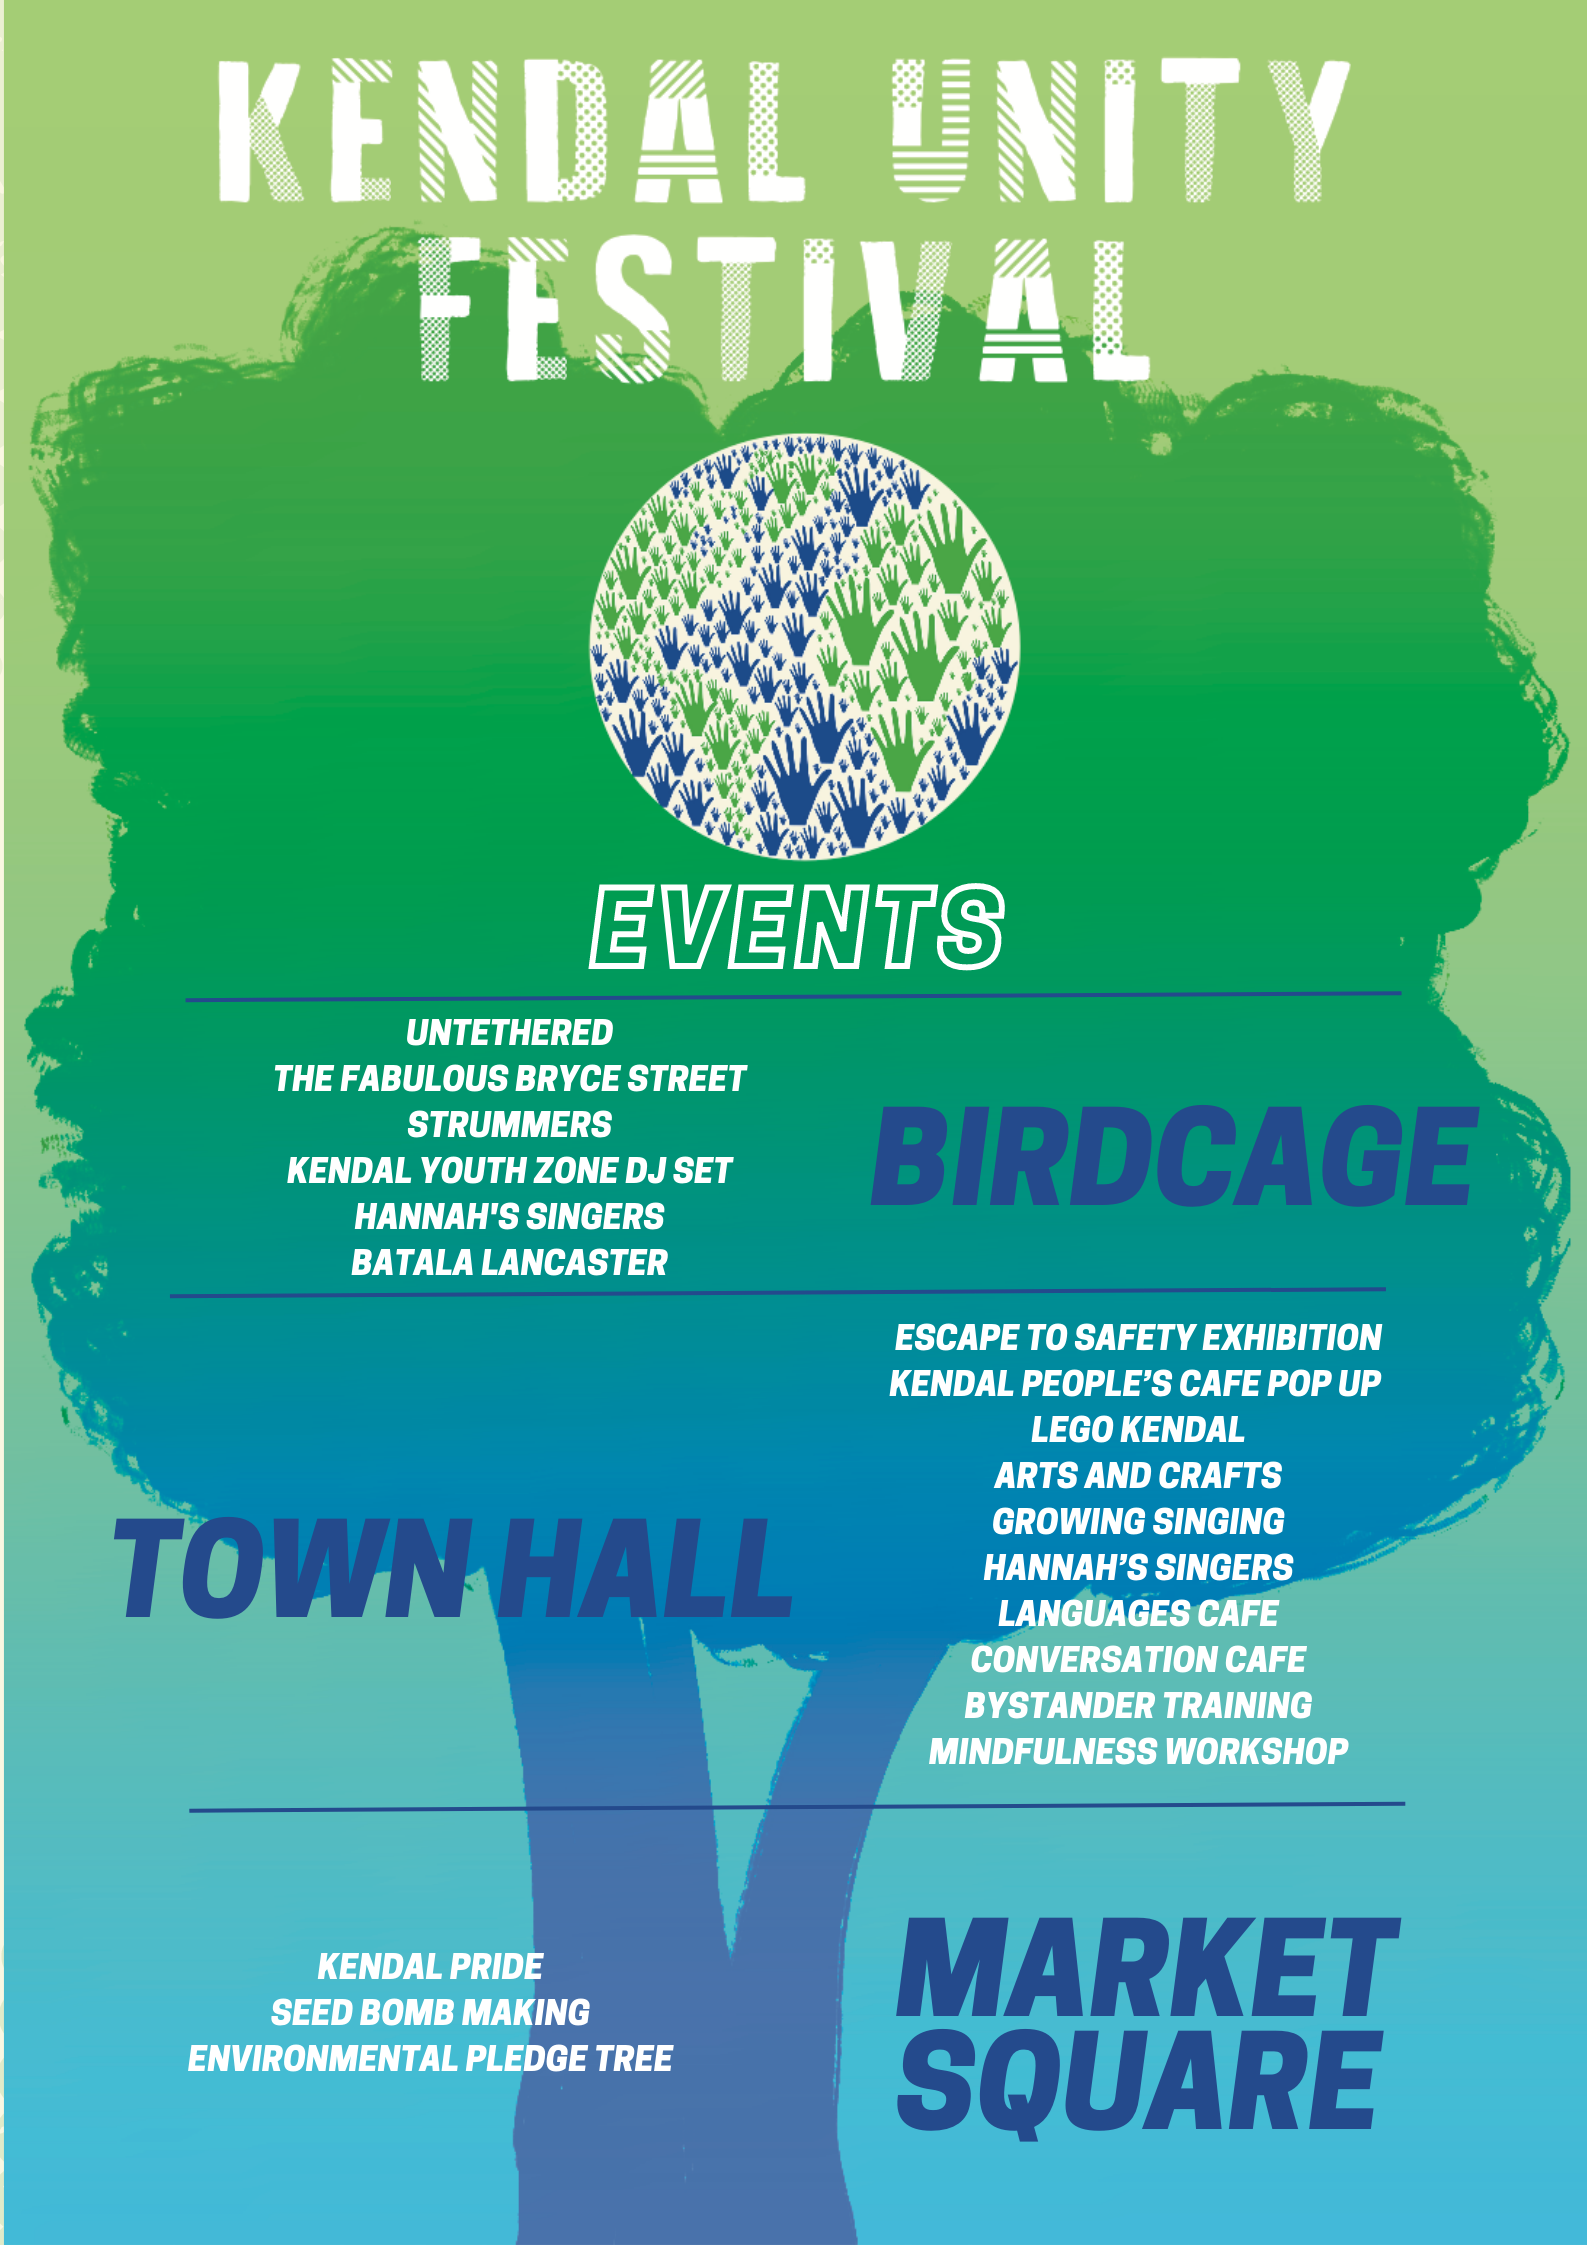 Kendal Unity Festival events. Birdcage: UnTethered, The Fabulous Bryce Street Strummers, Kendal youth zone DJ set, Hannah's Singers, Batala Lancaster. Town Hall: Escape to Safety Exhibition, Kendal People's Cafe Pop Up, Lego Kendal, Growing Singing, Hannah's Singers, Conversation Cafe, Bystander training, Mindfulness workshop. Market Square: Kendal Pride, Seed bomb making, environmental pledge tree